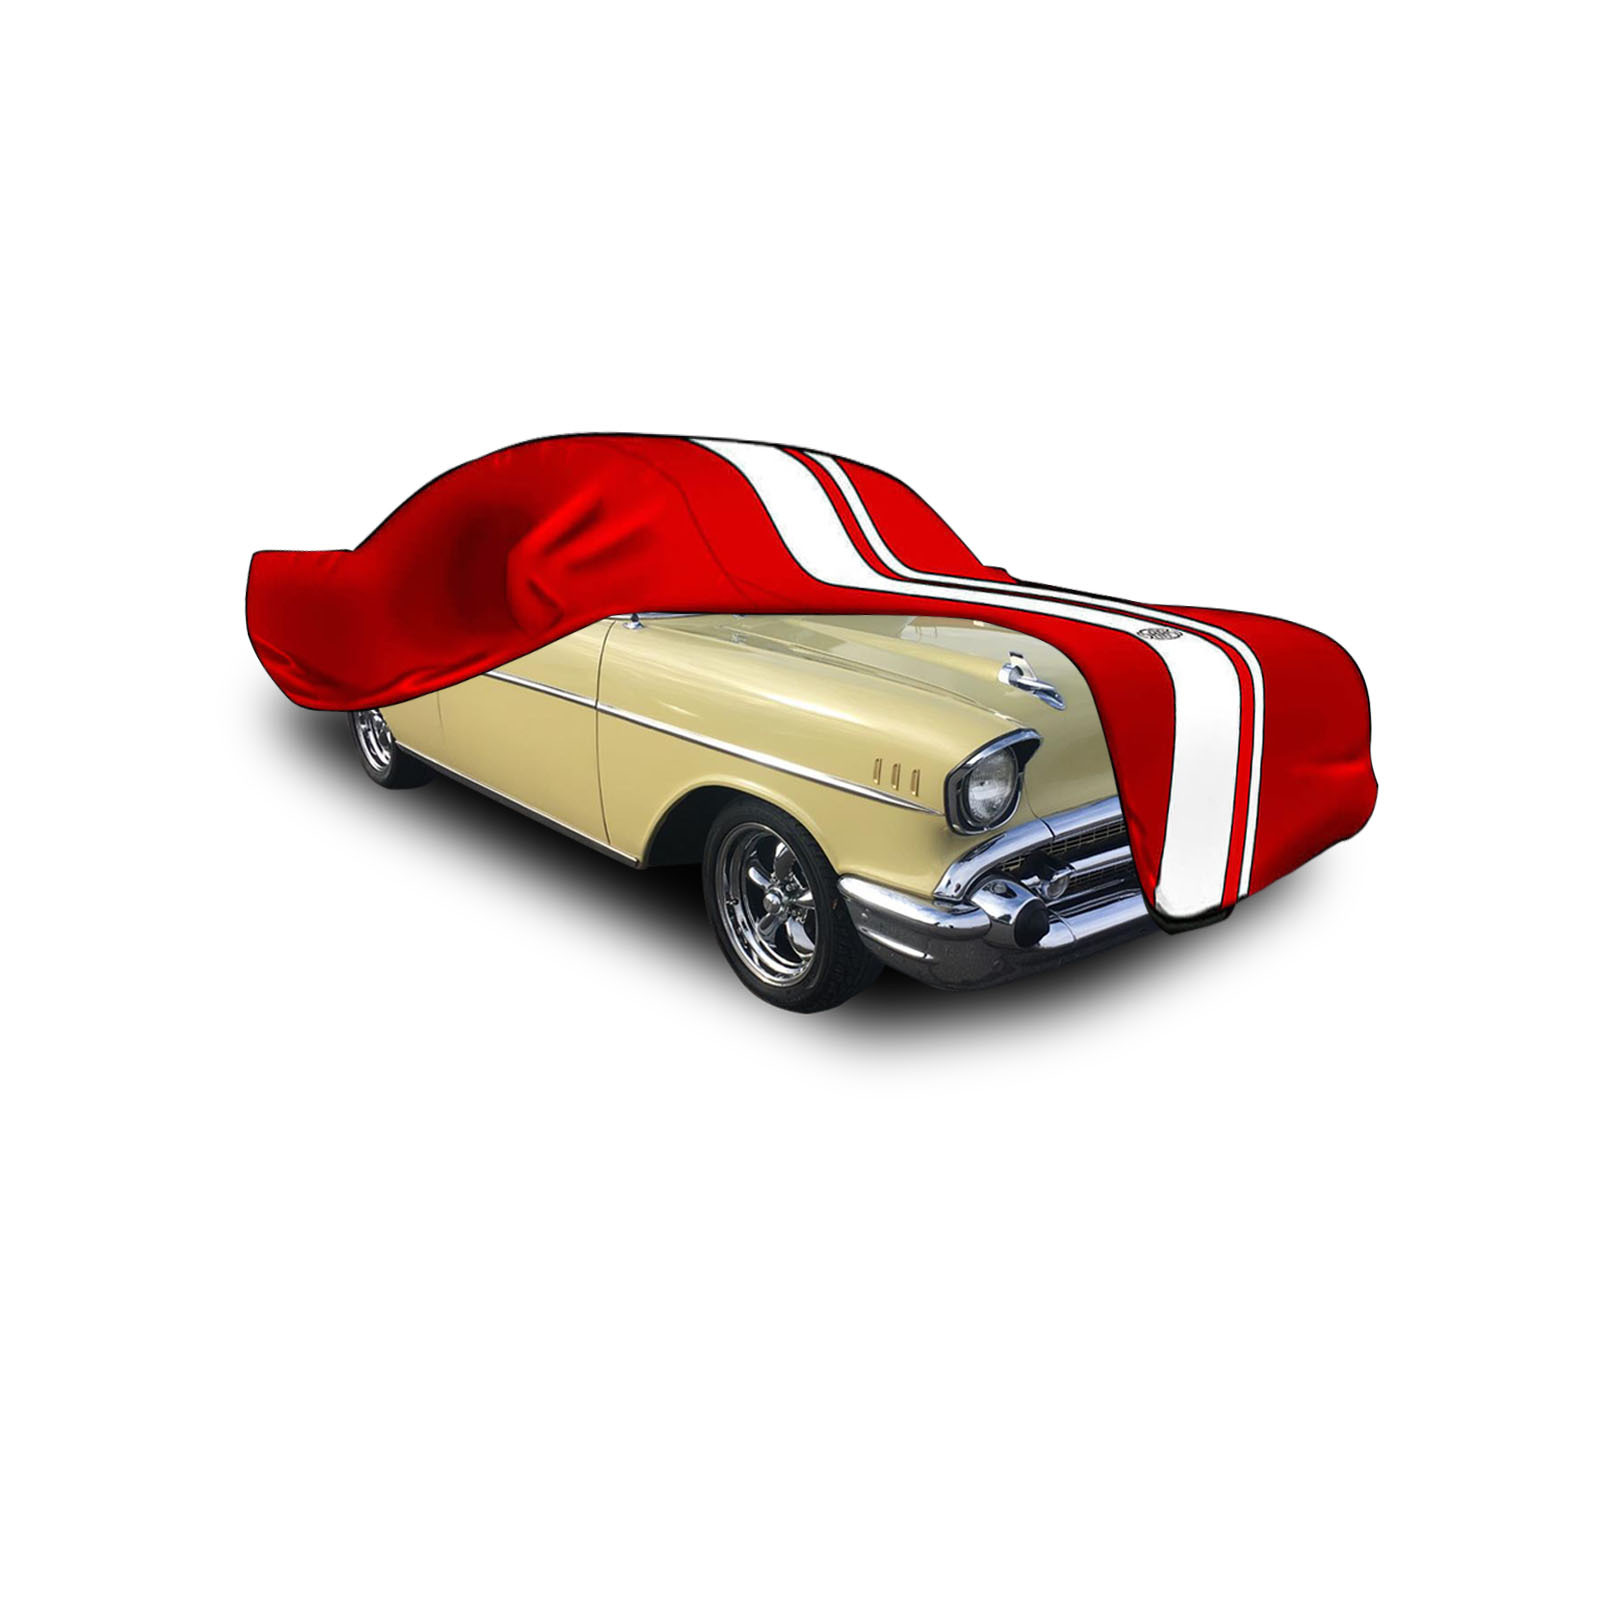 SAAS RED SHOW CAR COVER INDOOR DUST CLASSIC 5.7m Long FORD CHEVROLET 55 56 57 eBay